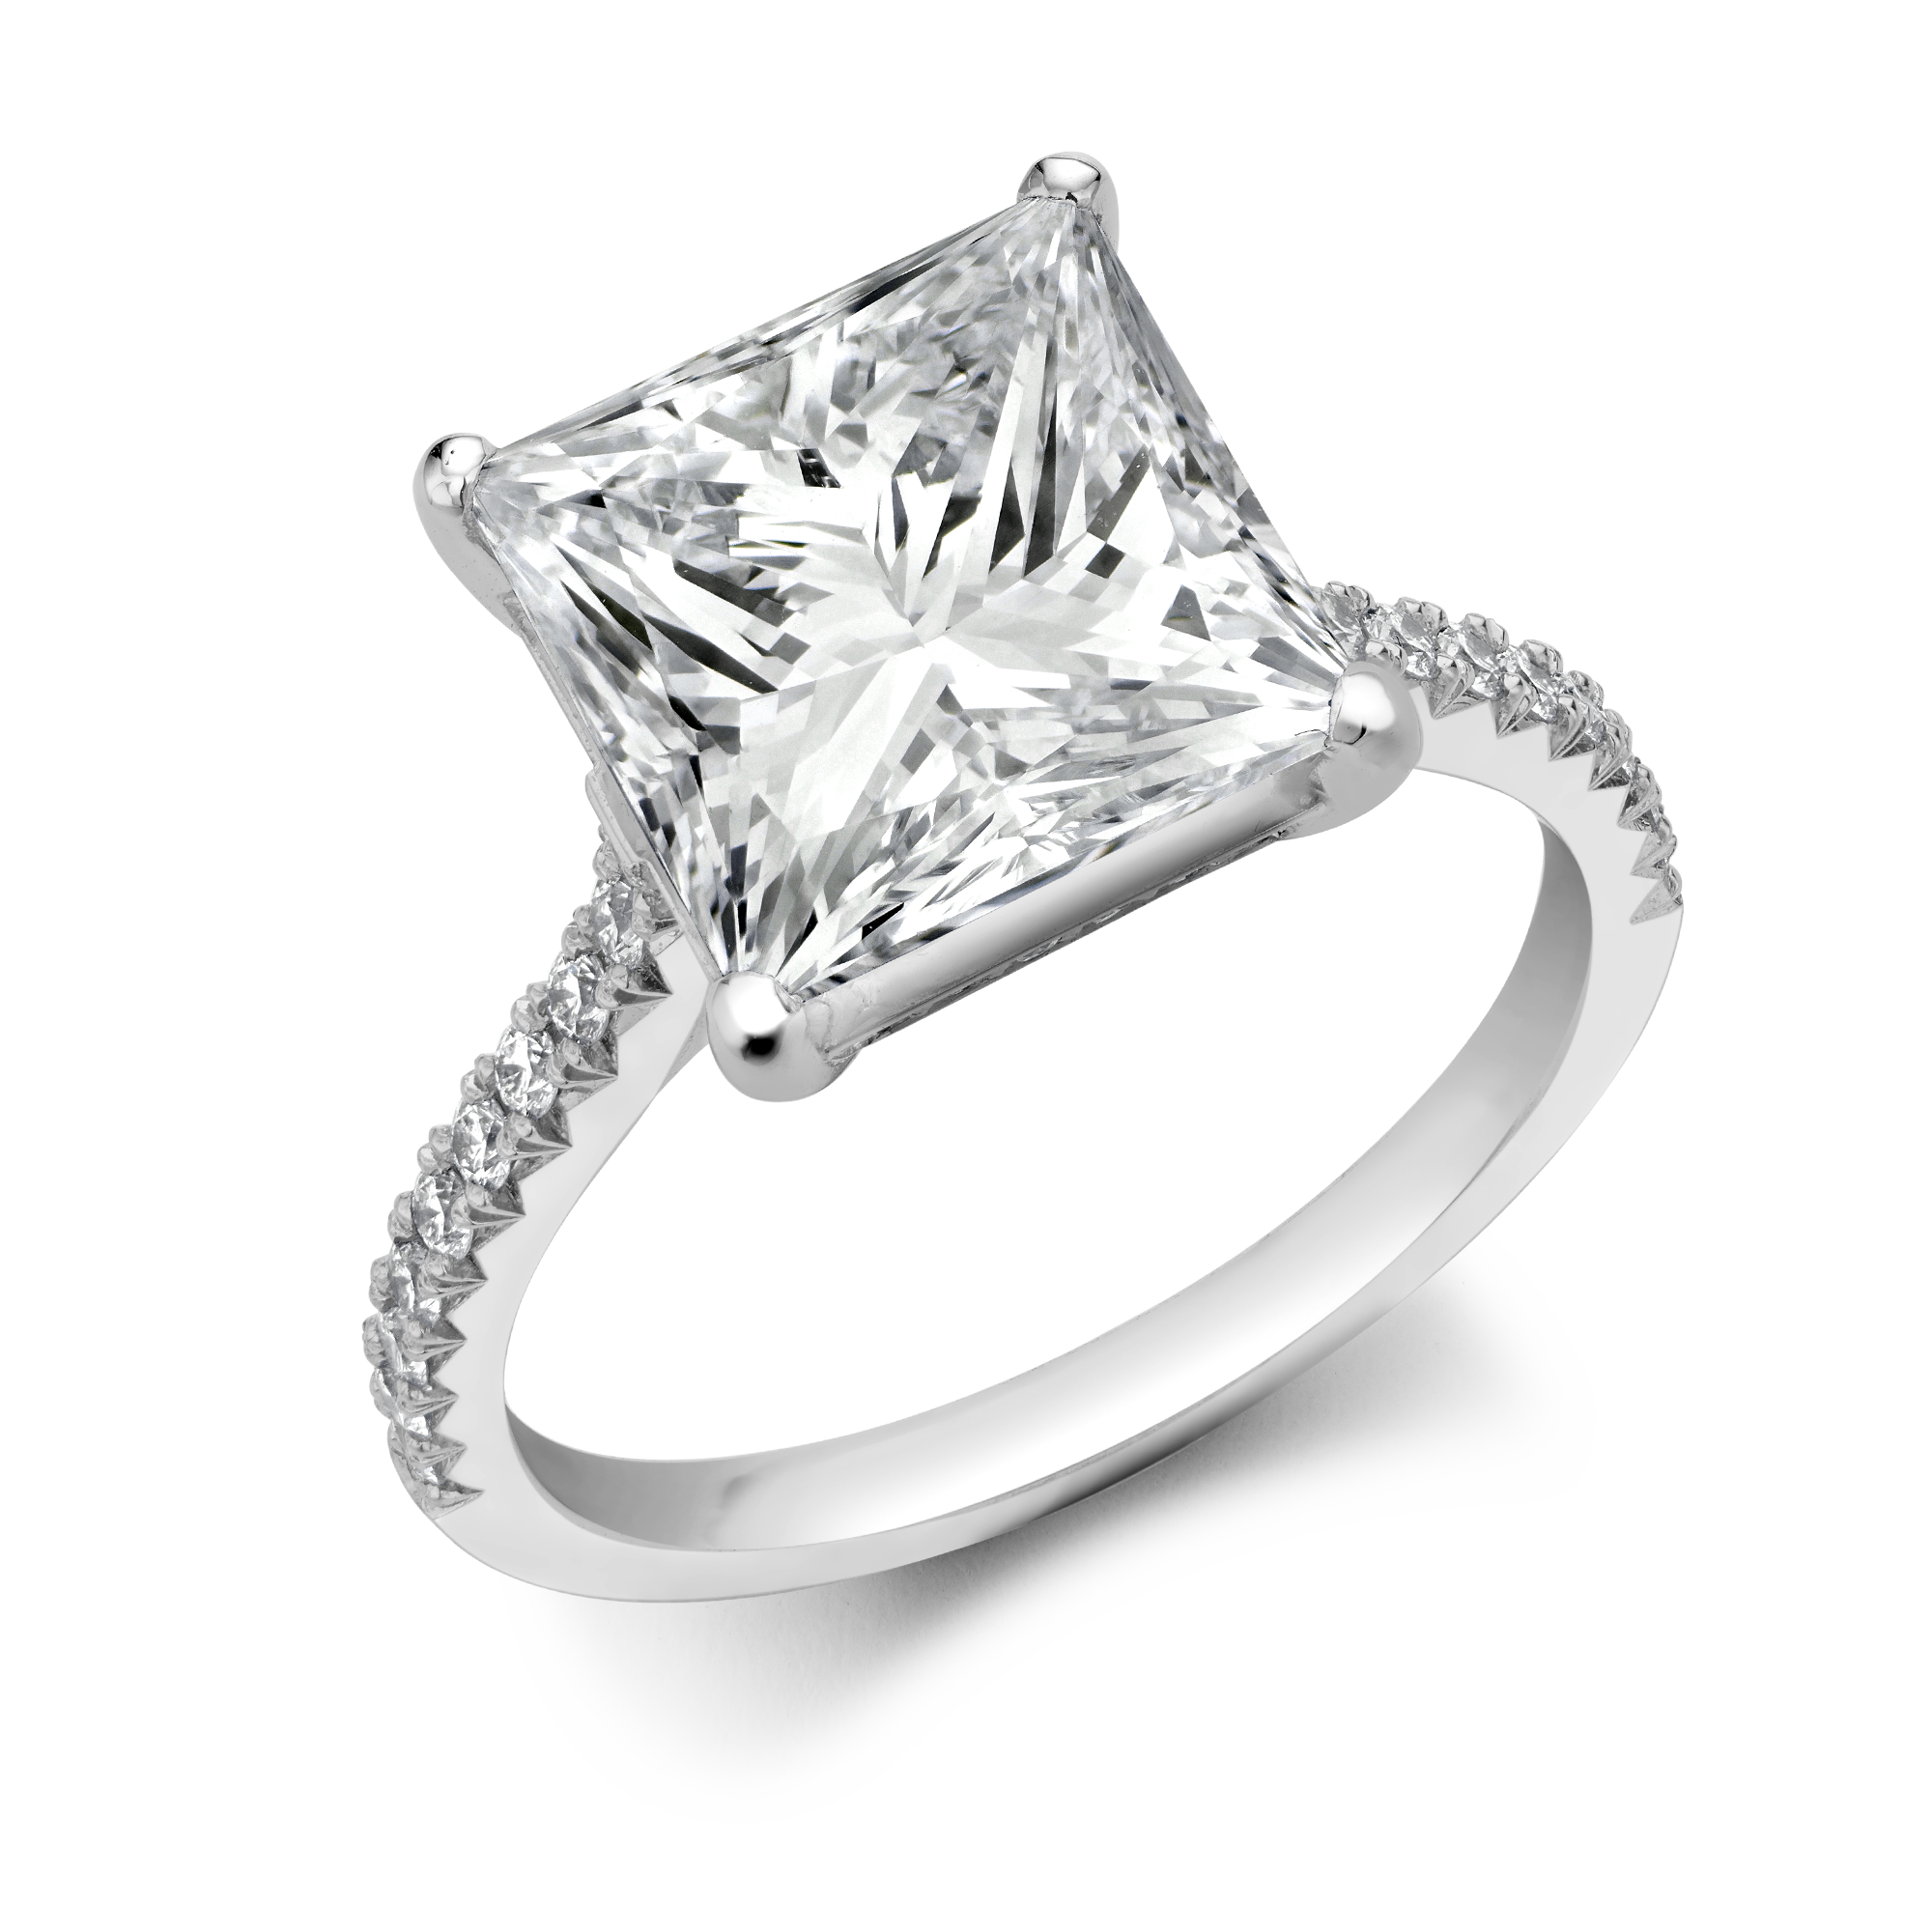 Diamond Solitaire Ring with Diamond Shoulders Princess Cut, Channel Set_1